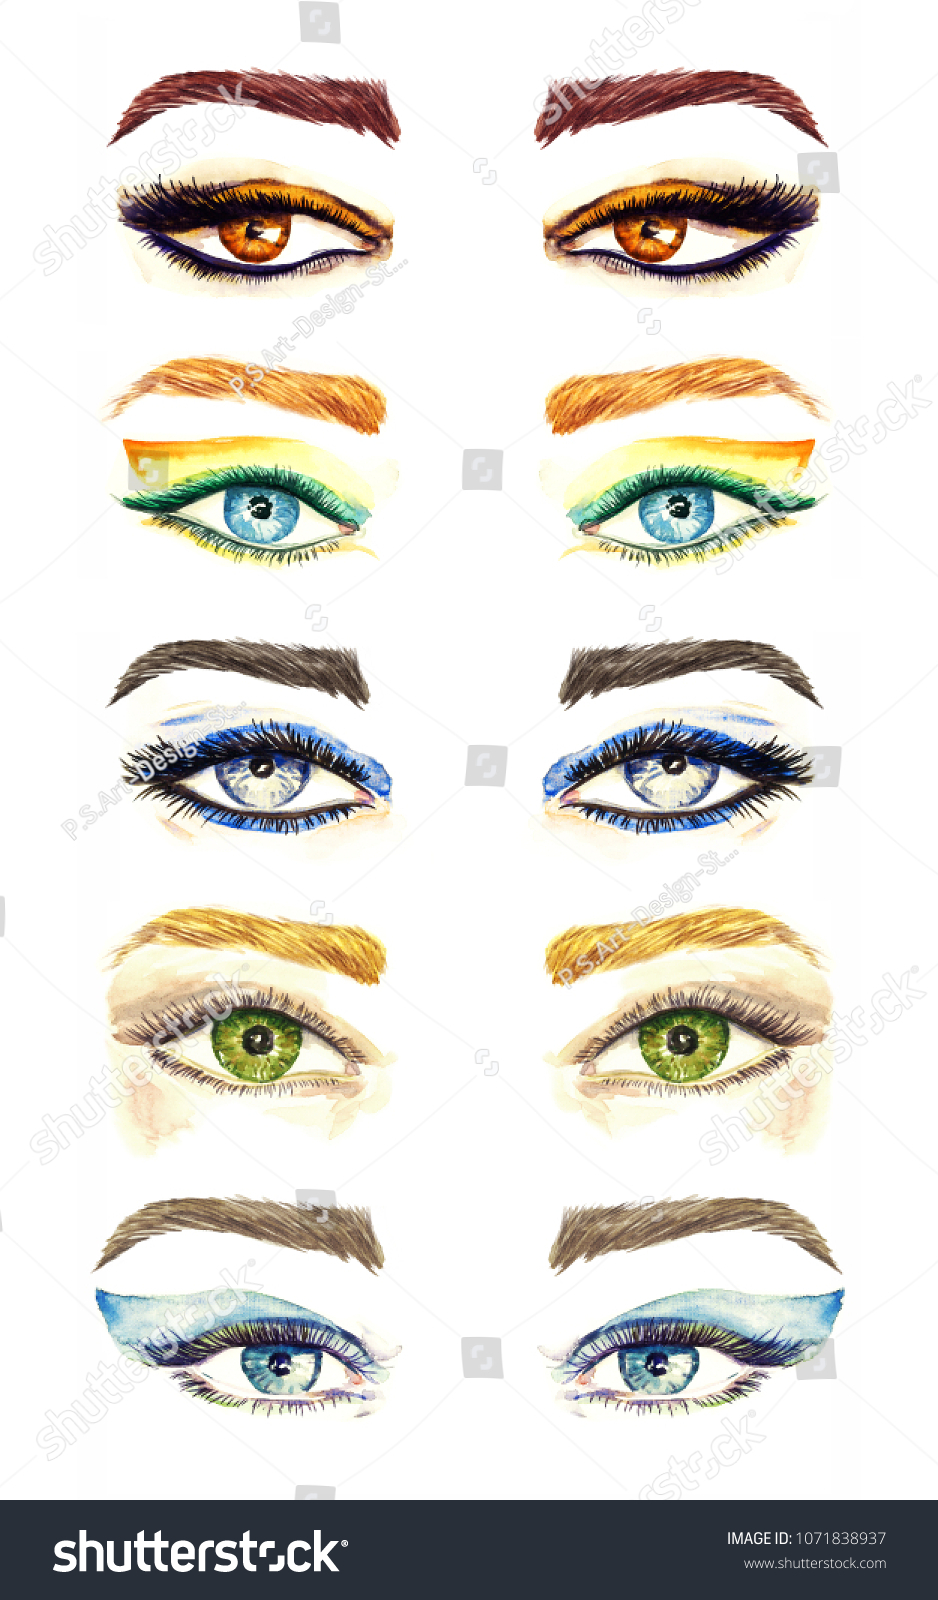 Makeup For Different Eye Shapes Royalty Free Stock Illustration Of Variety Eyes Shapes Different